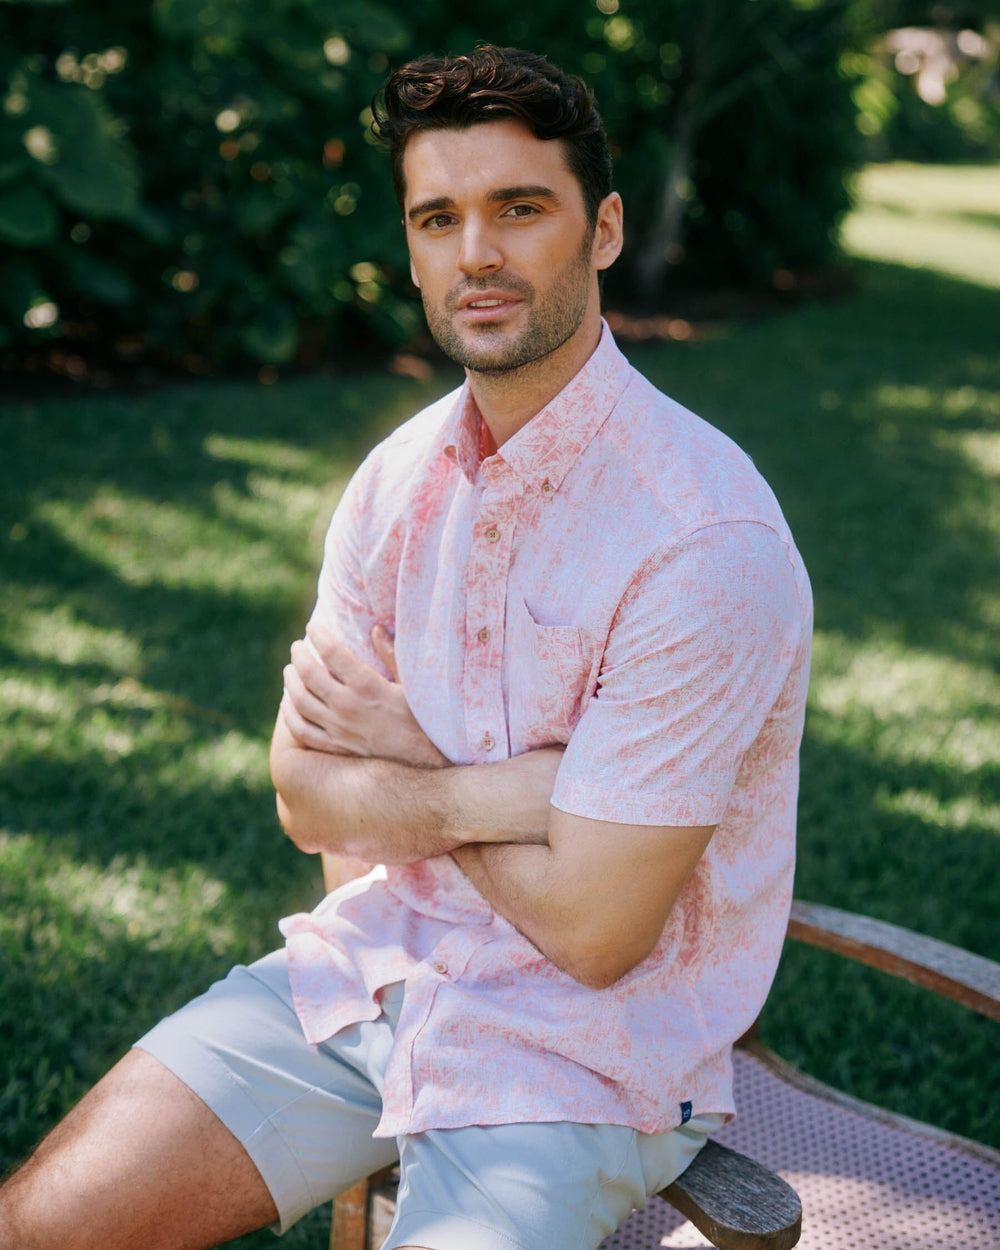 The lifestyle view of the Southern Tide Linen Rayon Keep Palm and Carry On Print Sport Shirt by Southern Tide - Rosewood Red